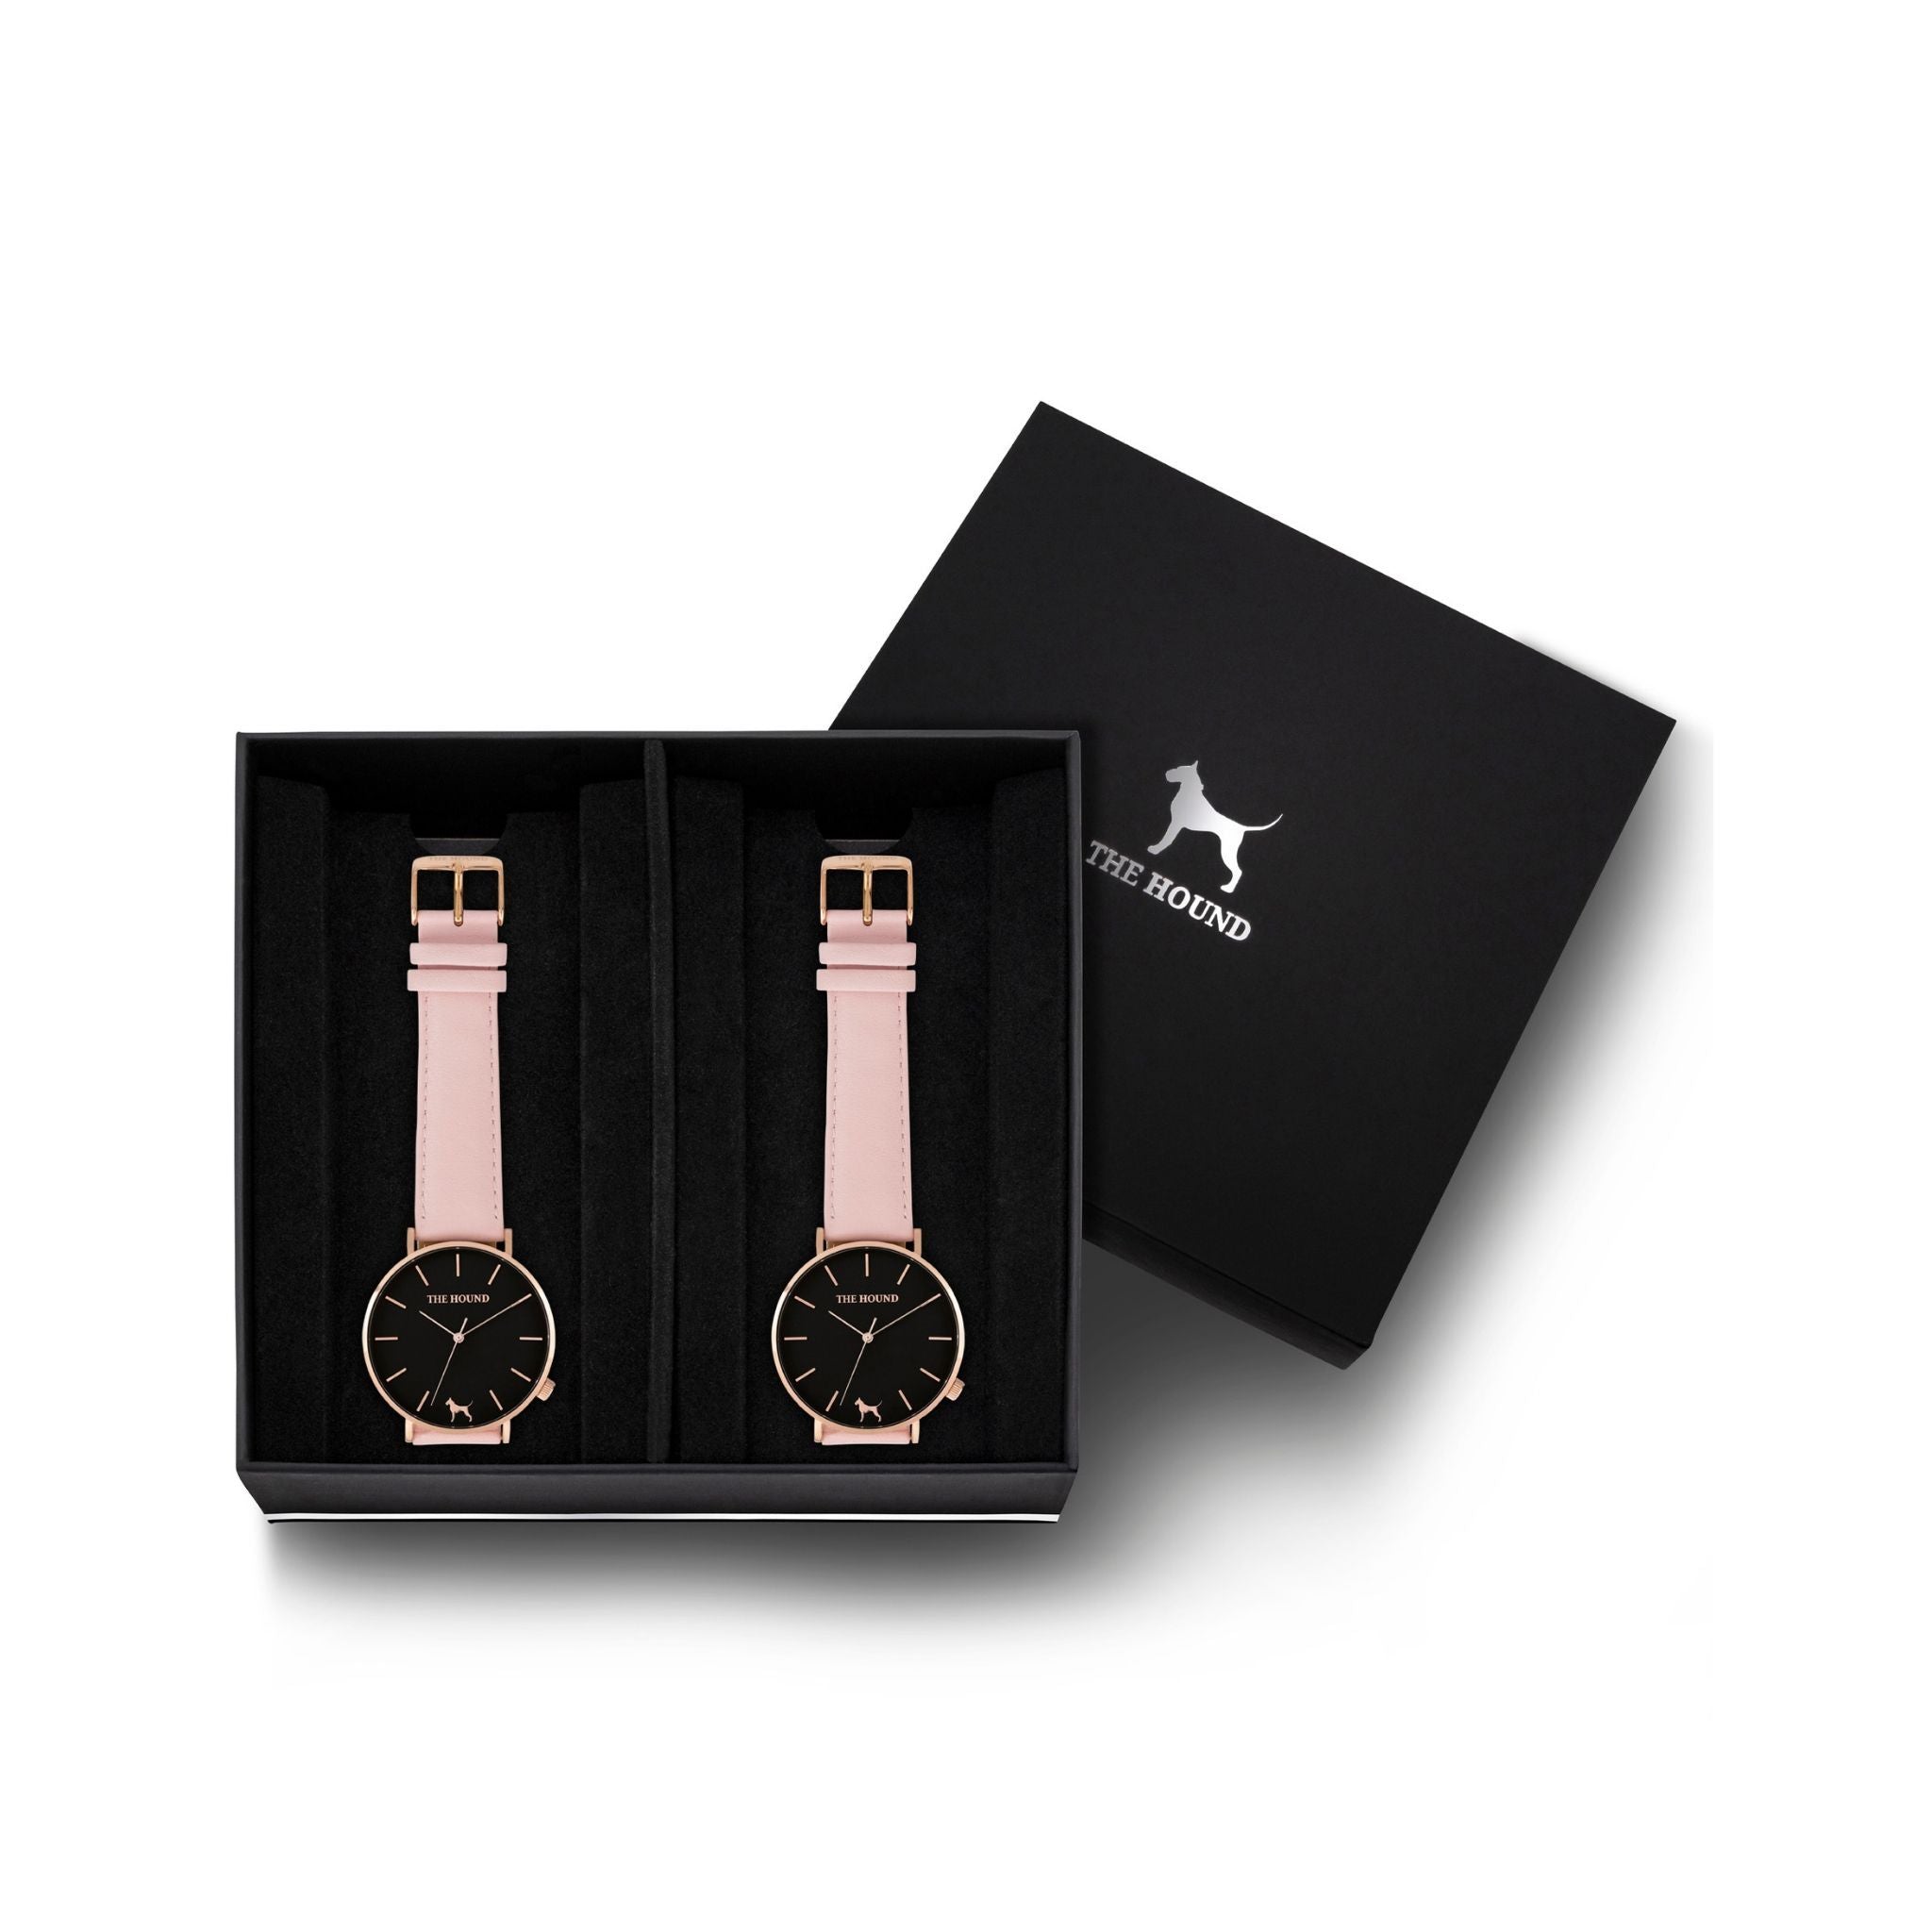 Custom gift set - Rose gold and black watch with stitched blush pink genuine leather band and a rose gold and black watch with stitched blush pink genuine leather band